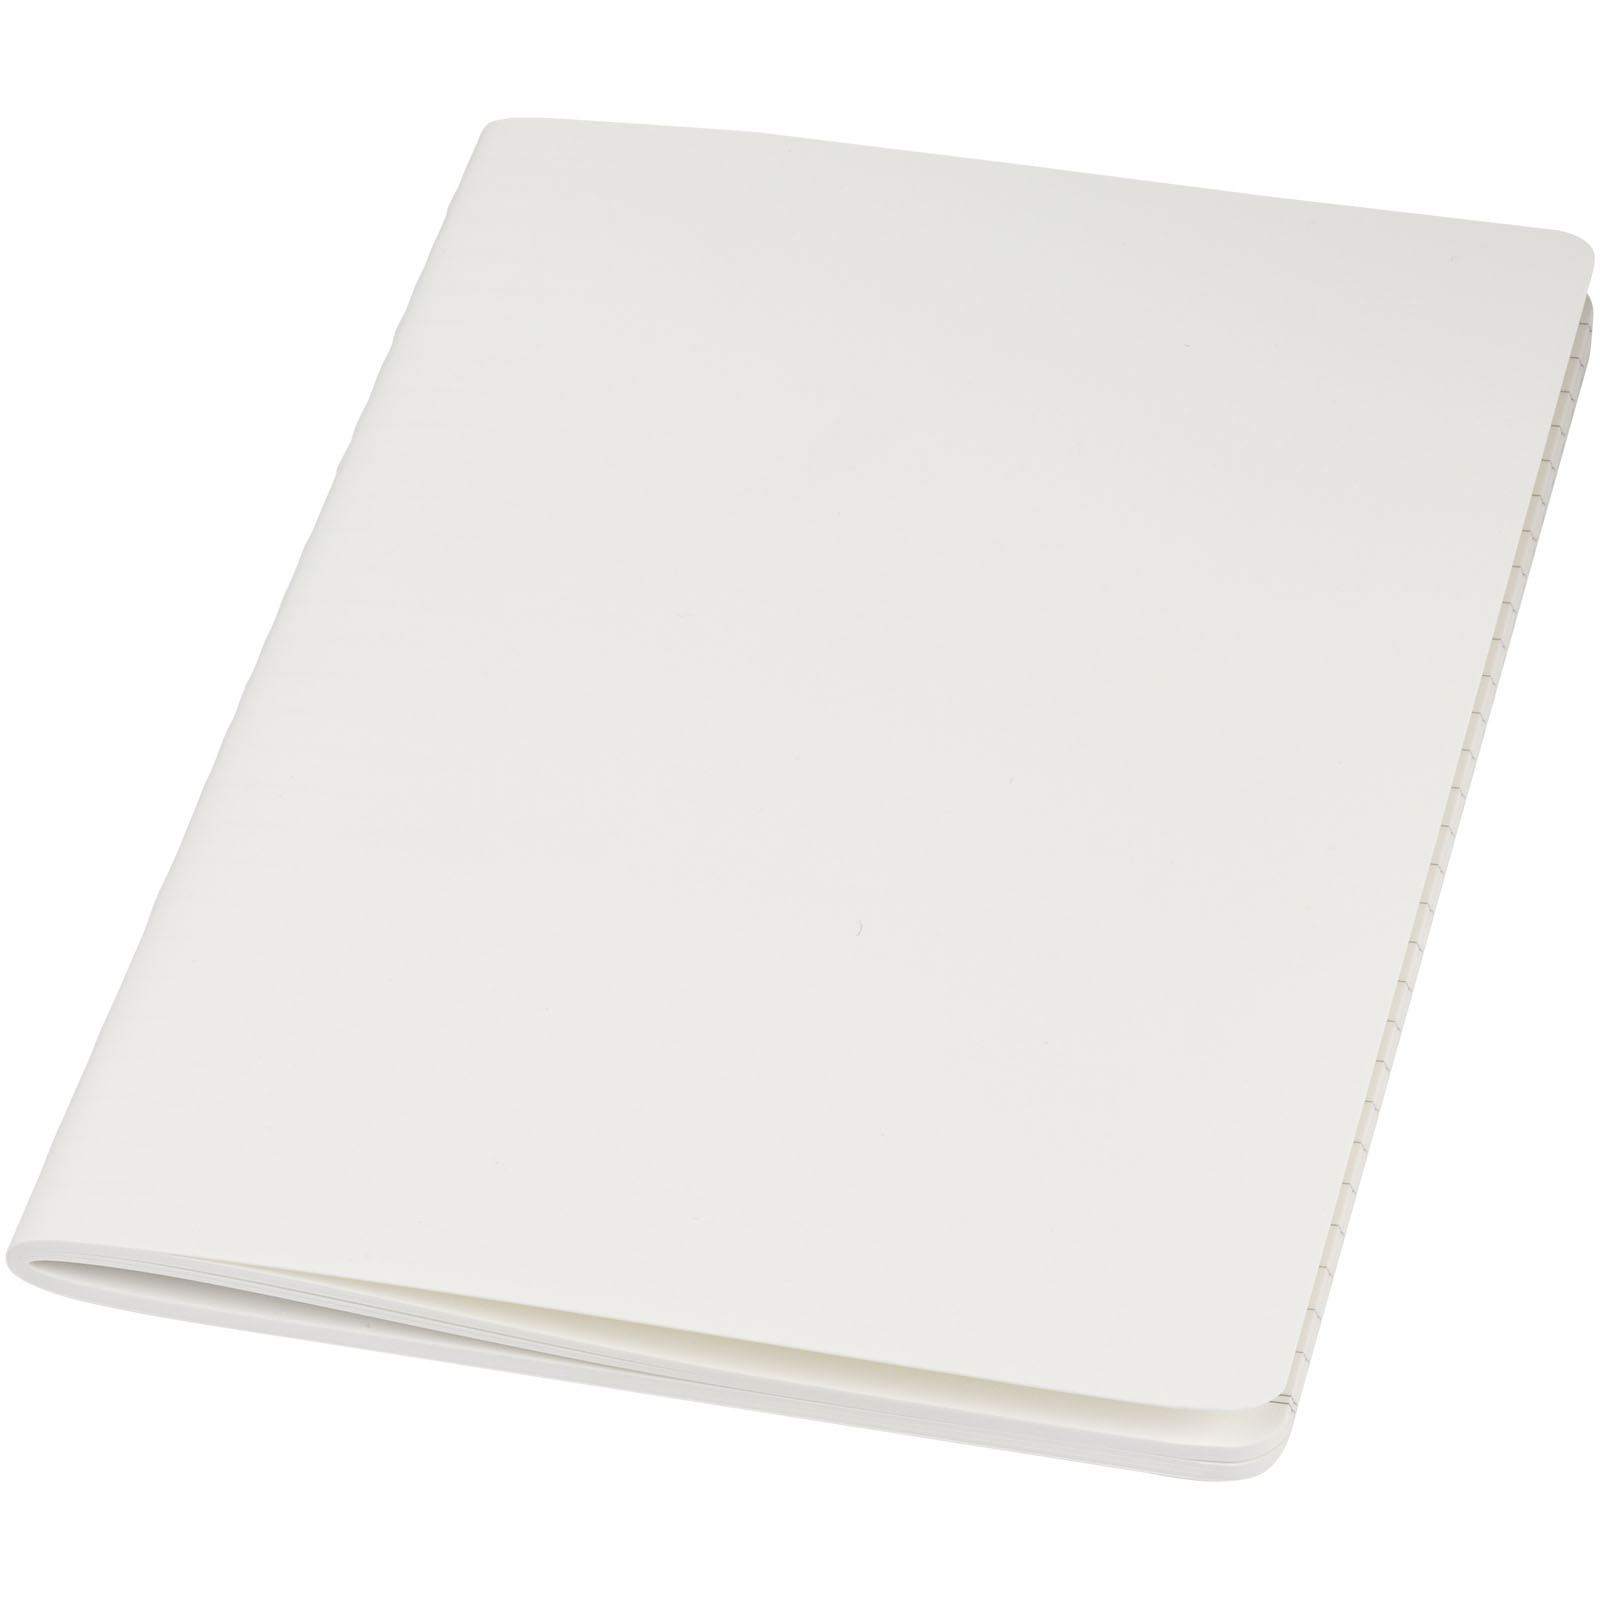 Advertising Soft cover notebooks - Shale stone paper cahier journal - 0